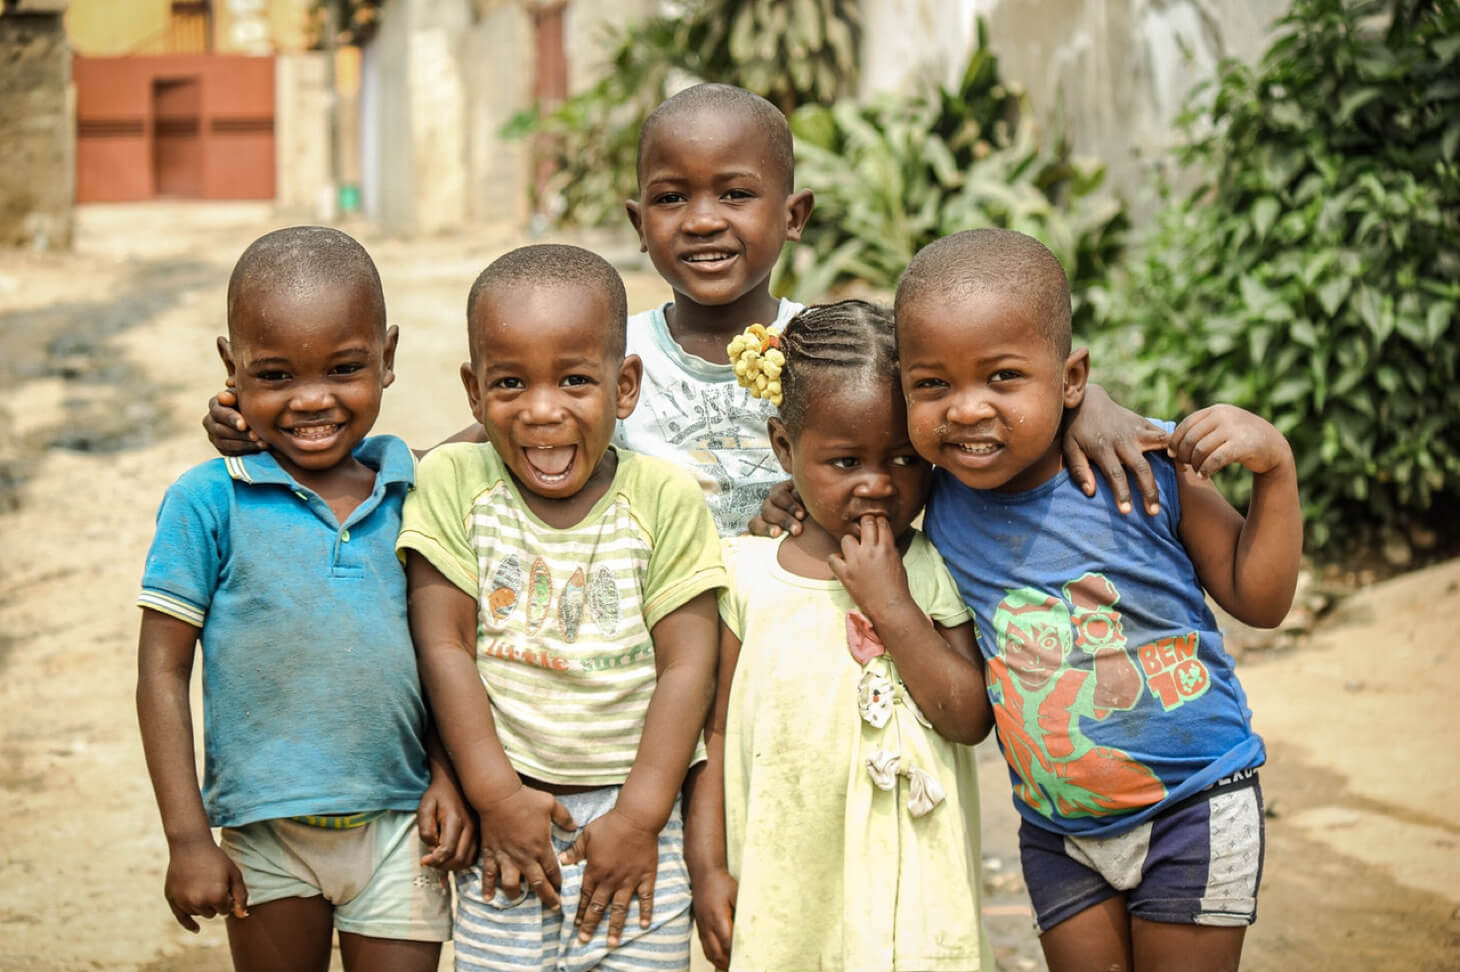 A group of five African children